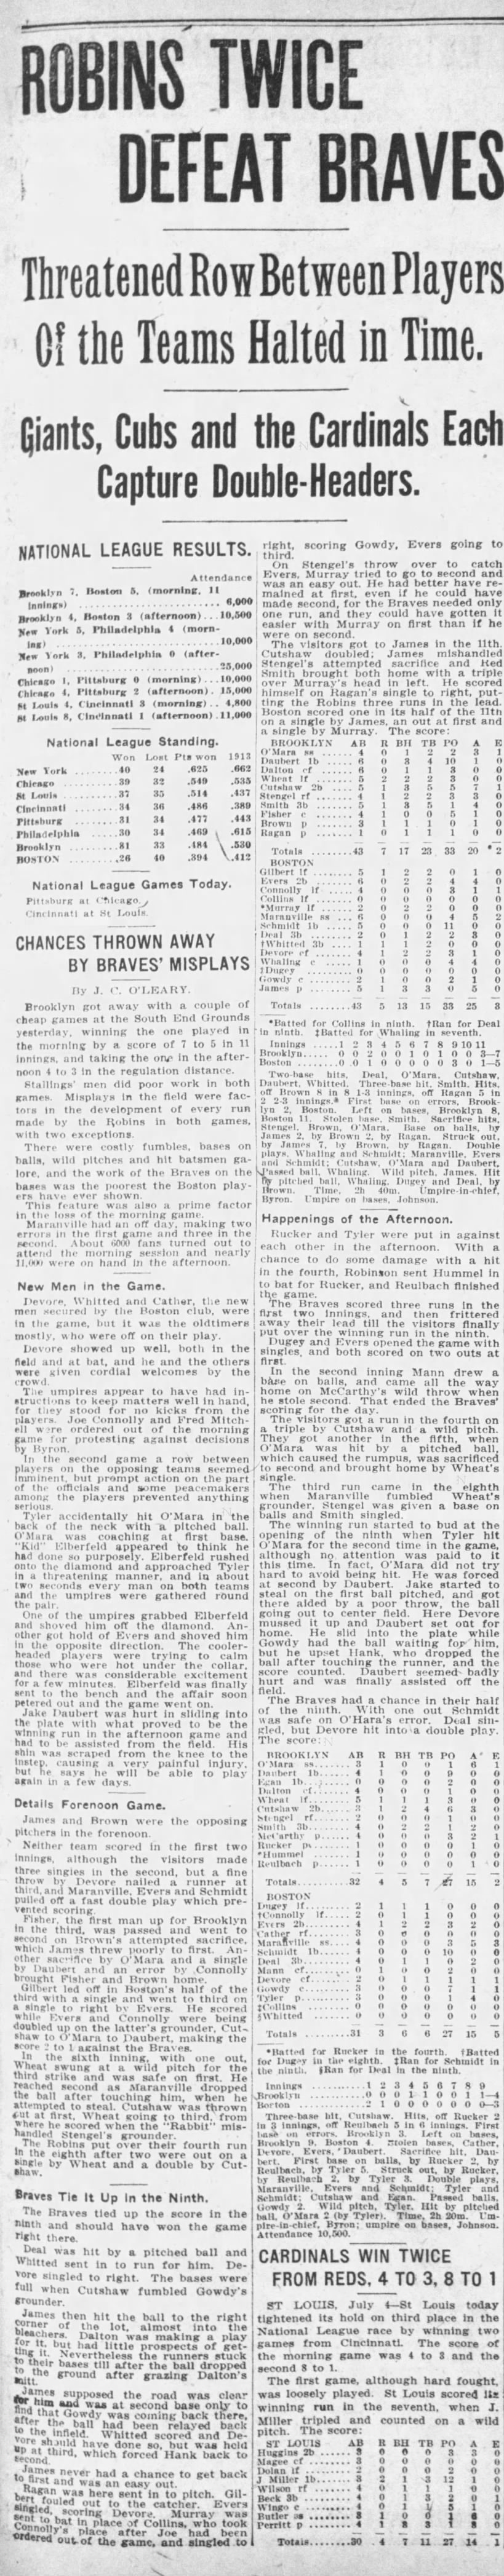 Braves lose DH to the Brooklyn Robins - July 194